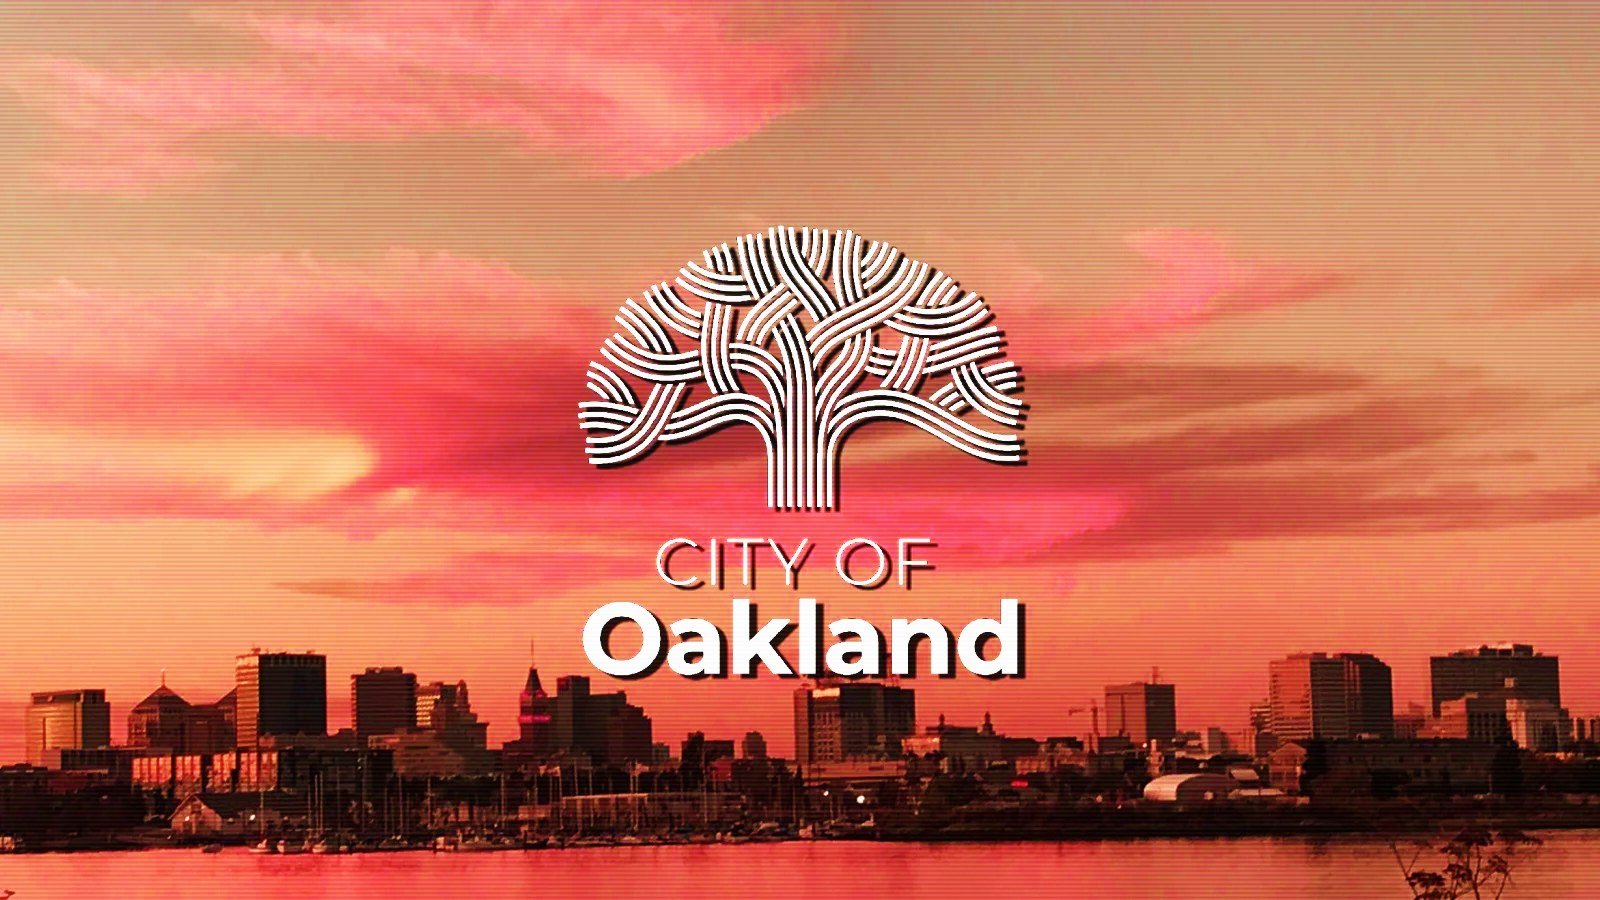 City of Oakland declares state of emergency after ransomware attack